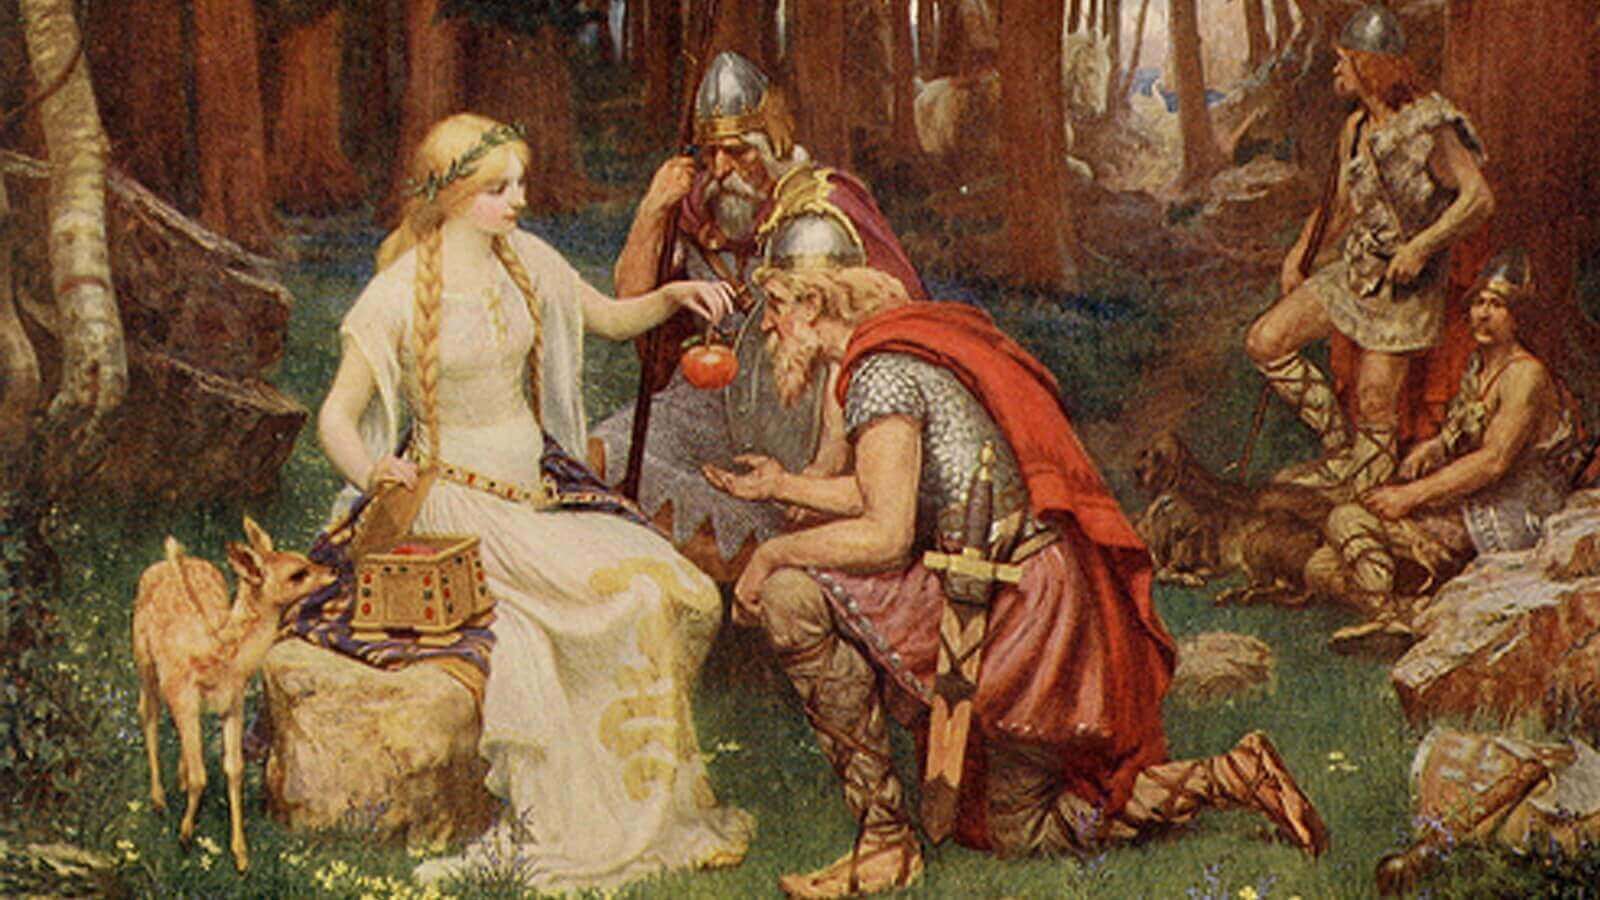 The Rare Tale of Idun and Her Golden Apples - Odin's Treasures